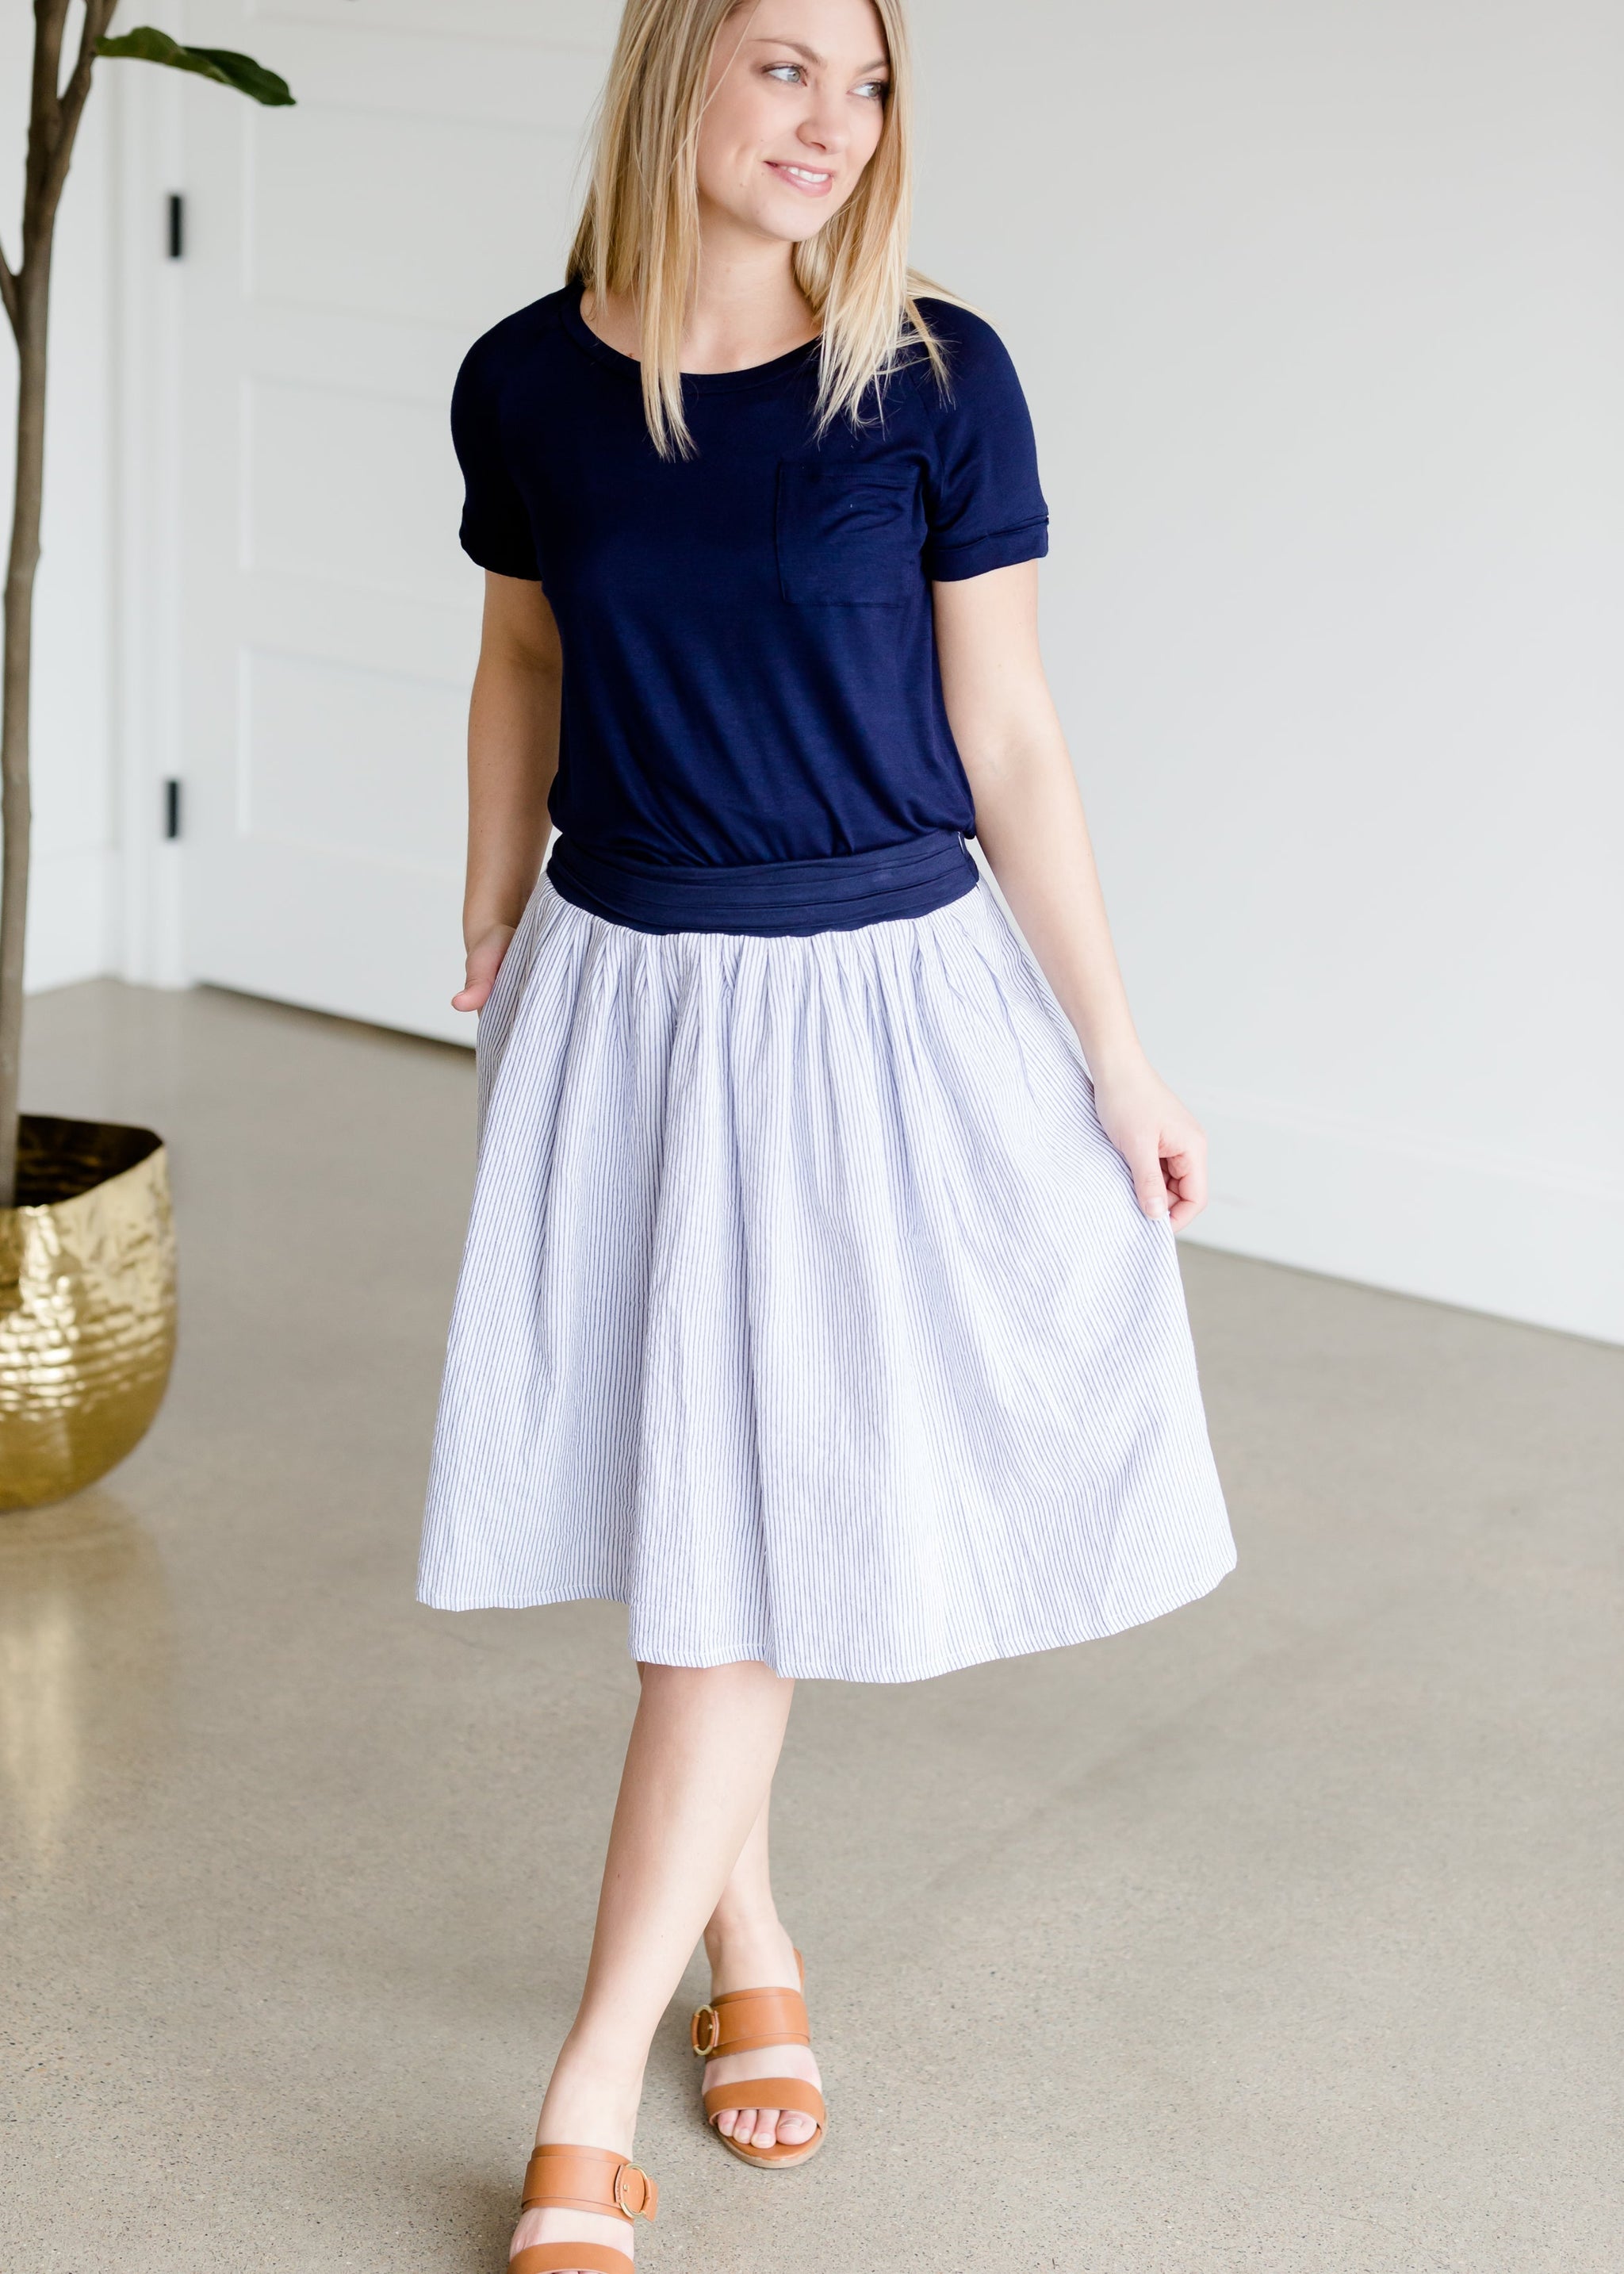 Blue and White Striped Midi Skirt - FINAL SALE – Inherit Co.